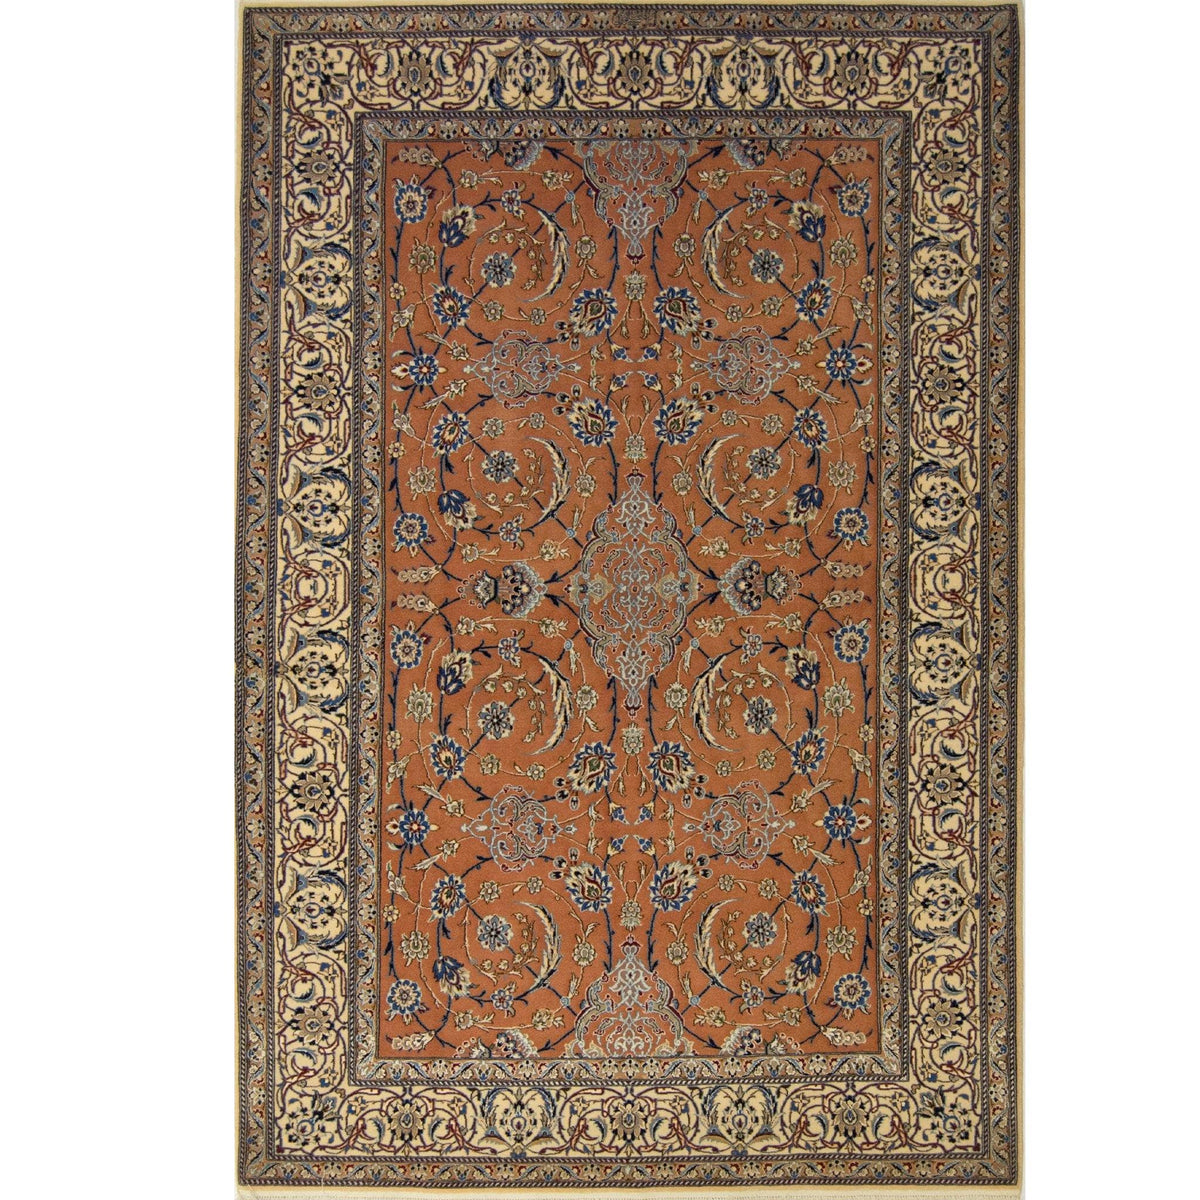 Authentic Persian Fine Hand-knotted Wool &amp; Silk 3LAA Nain Rug ( SIGNED HABIBIAN )